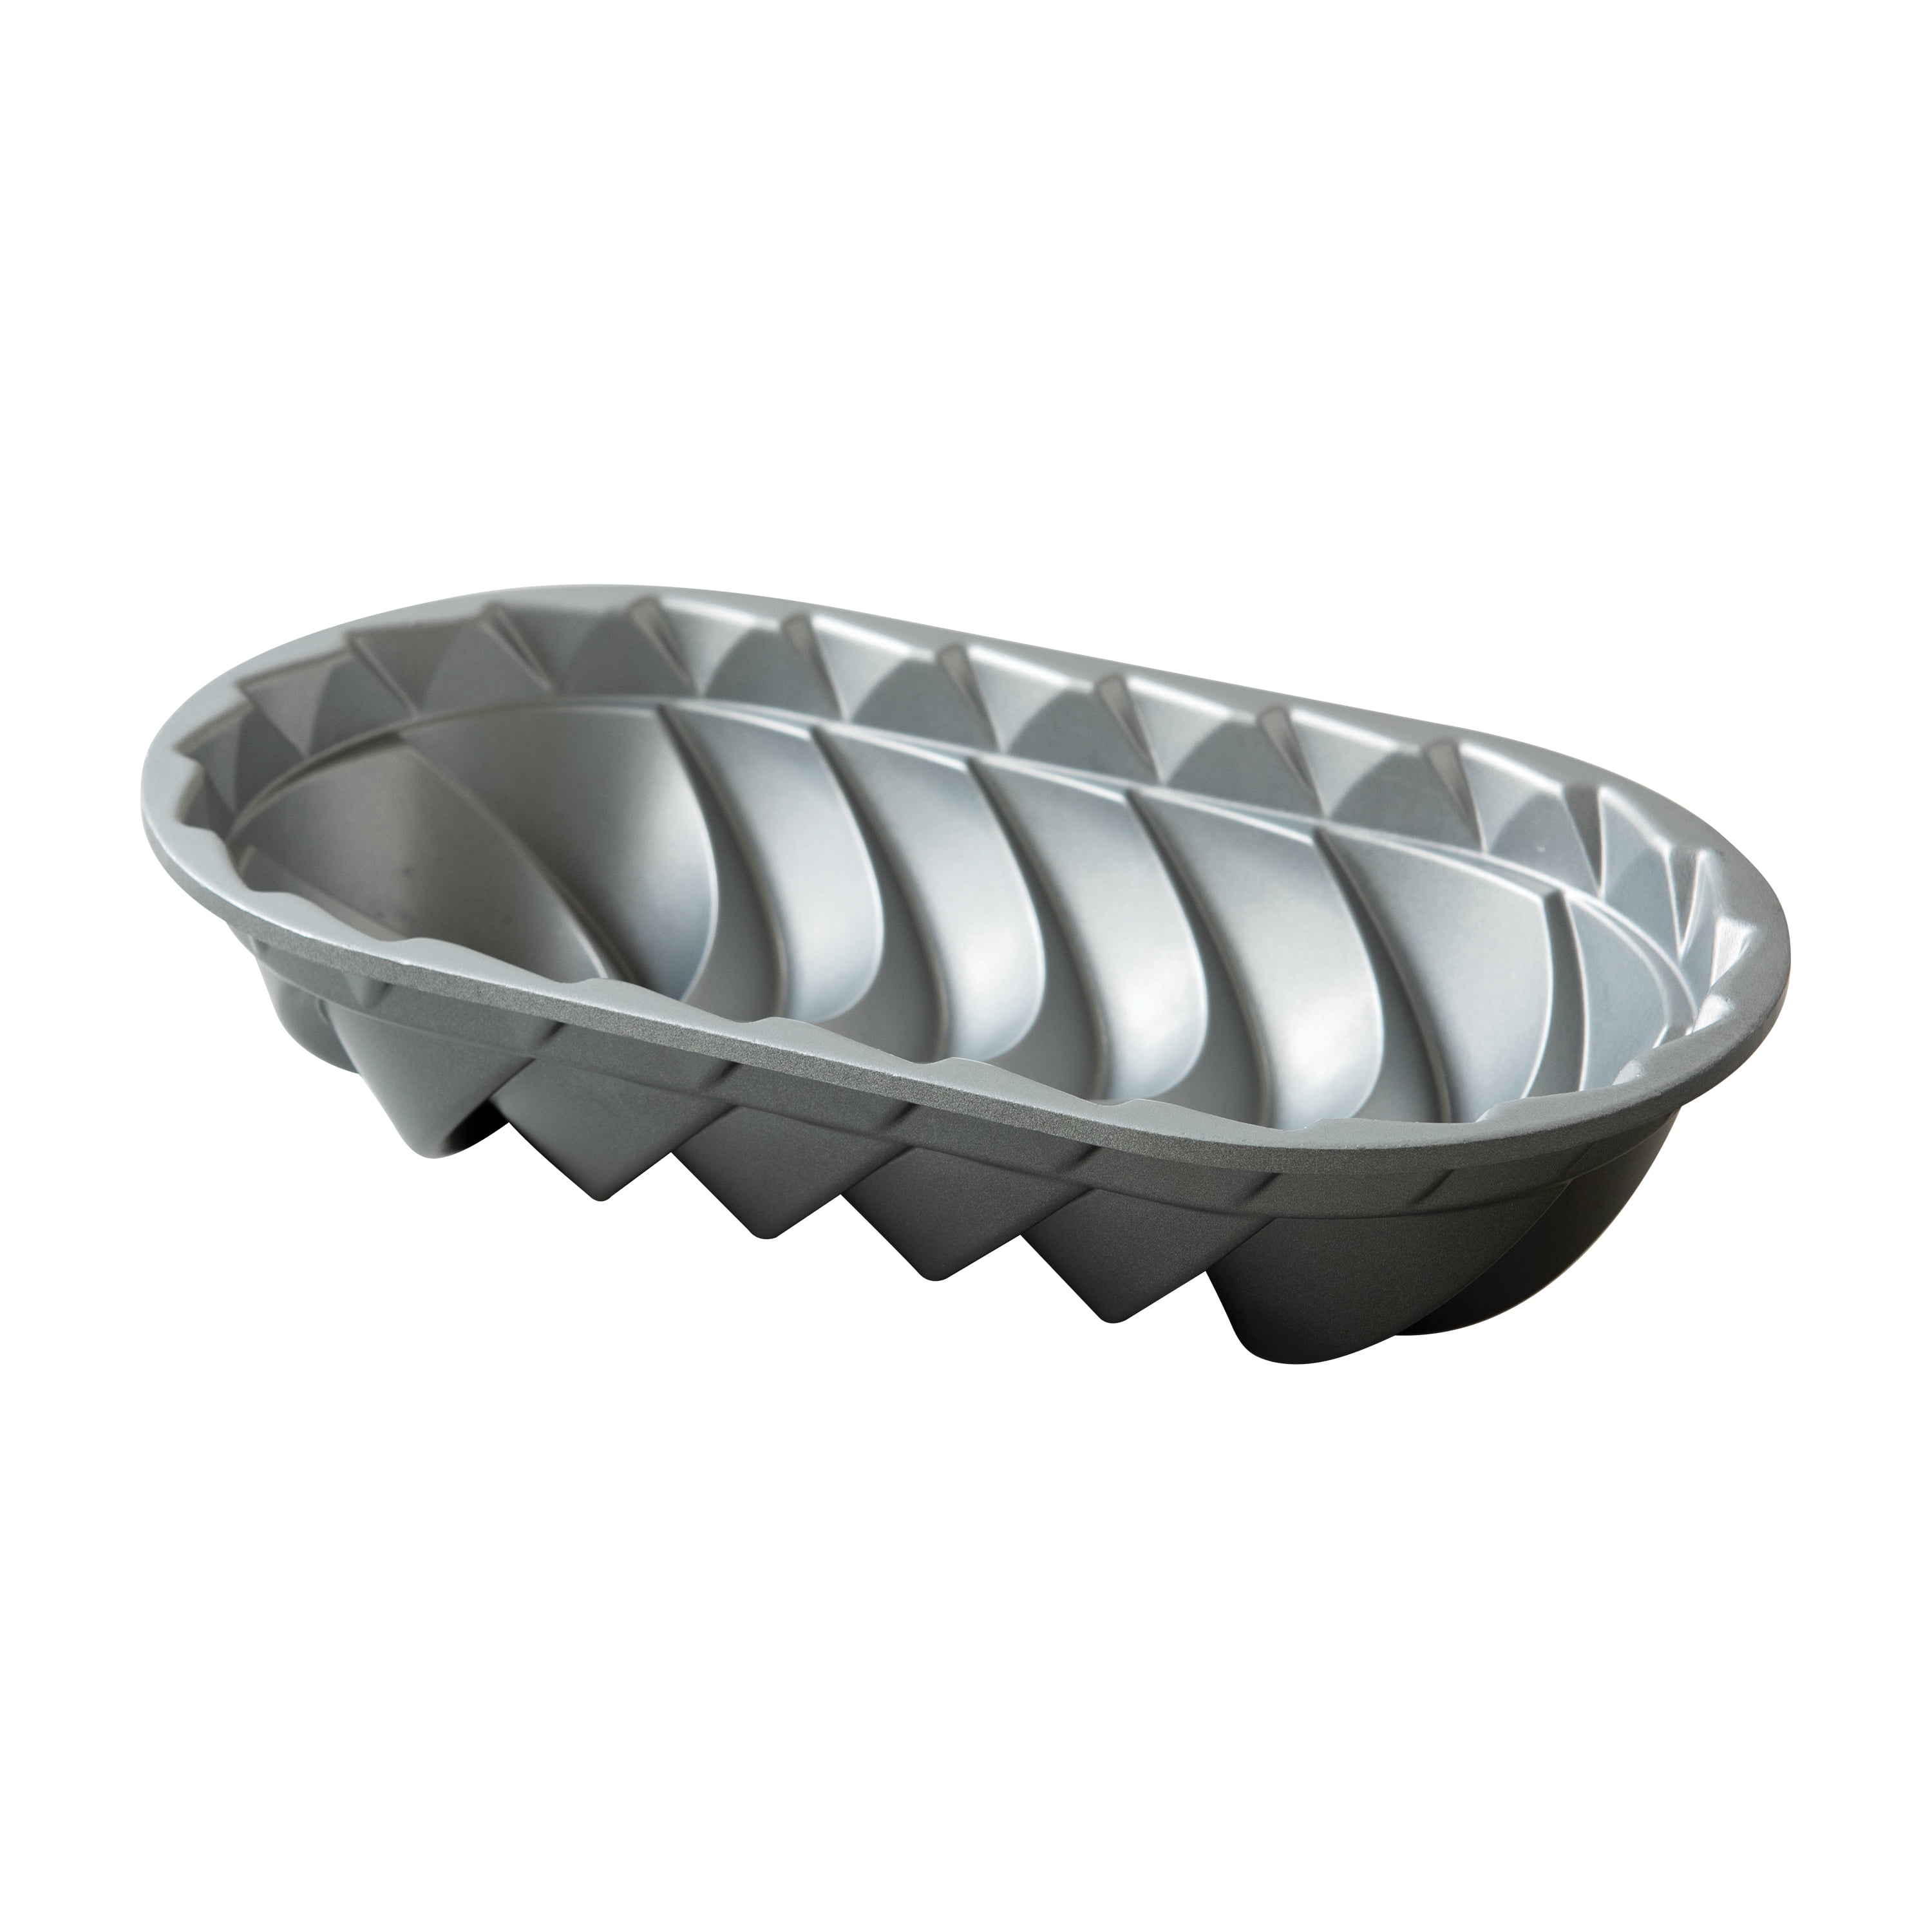 Nordic Ware Nordic Ware-45900-Loaf, 1-1/2 Pound, Natural Aluminum  Commercial Loaf Pan, Silver